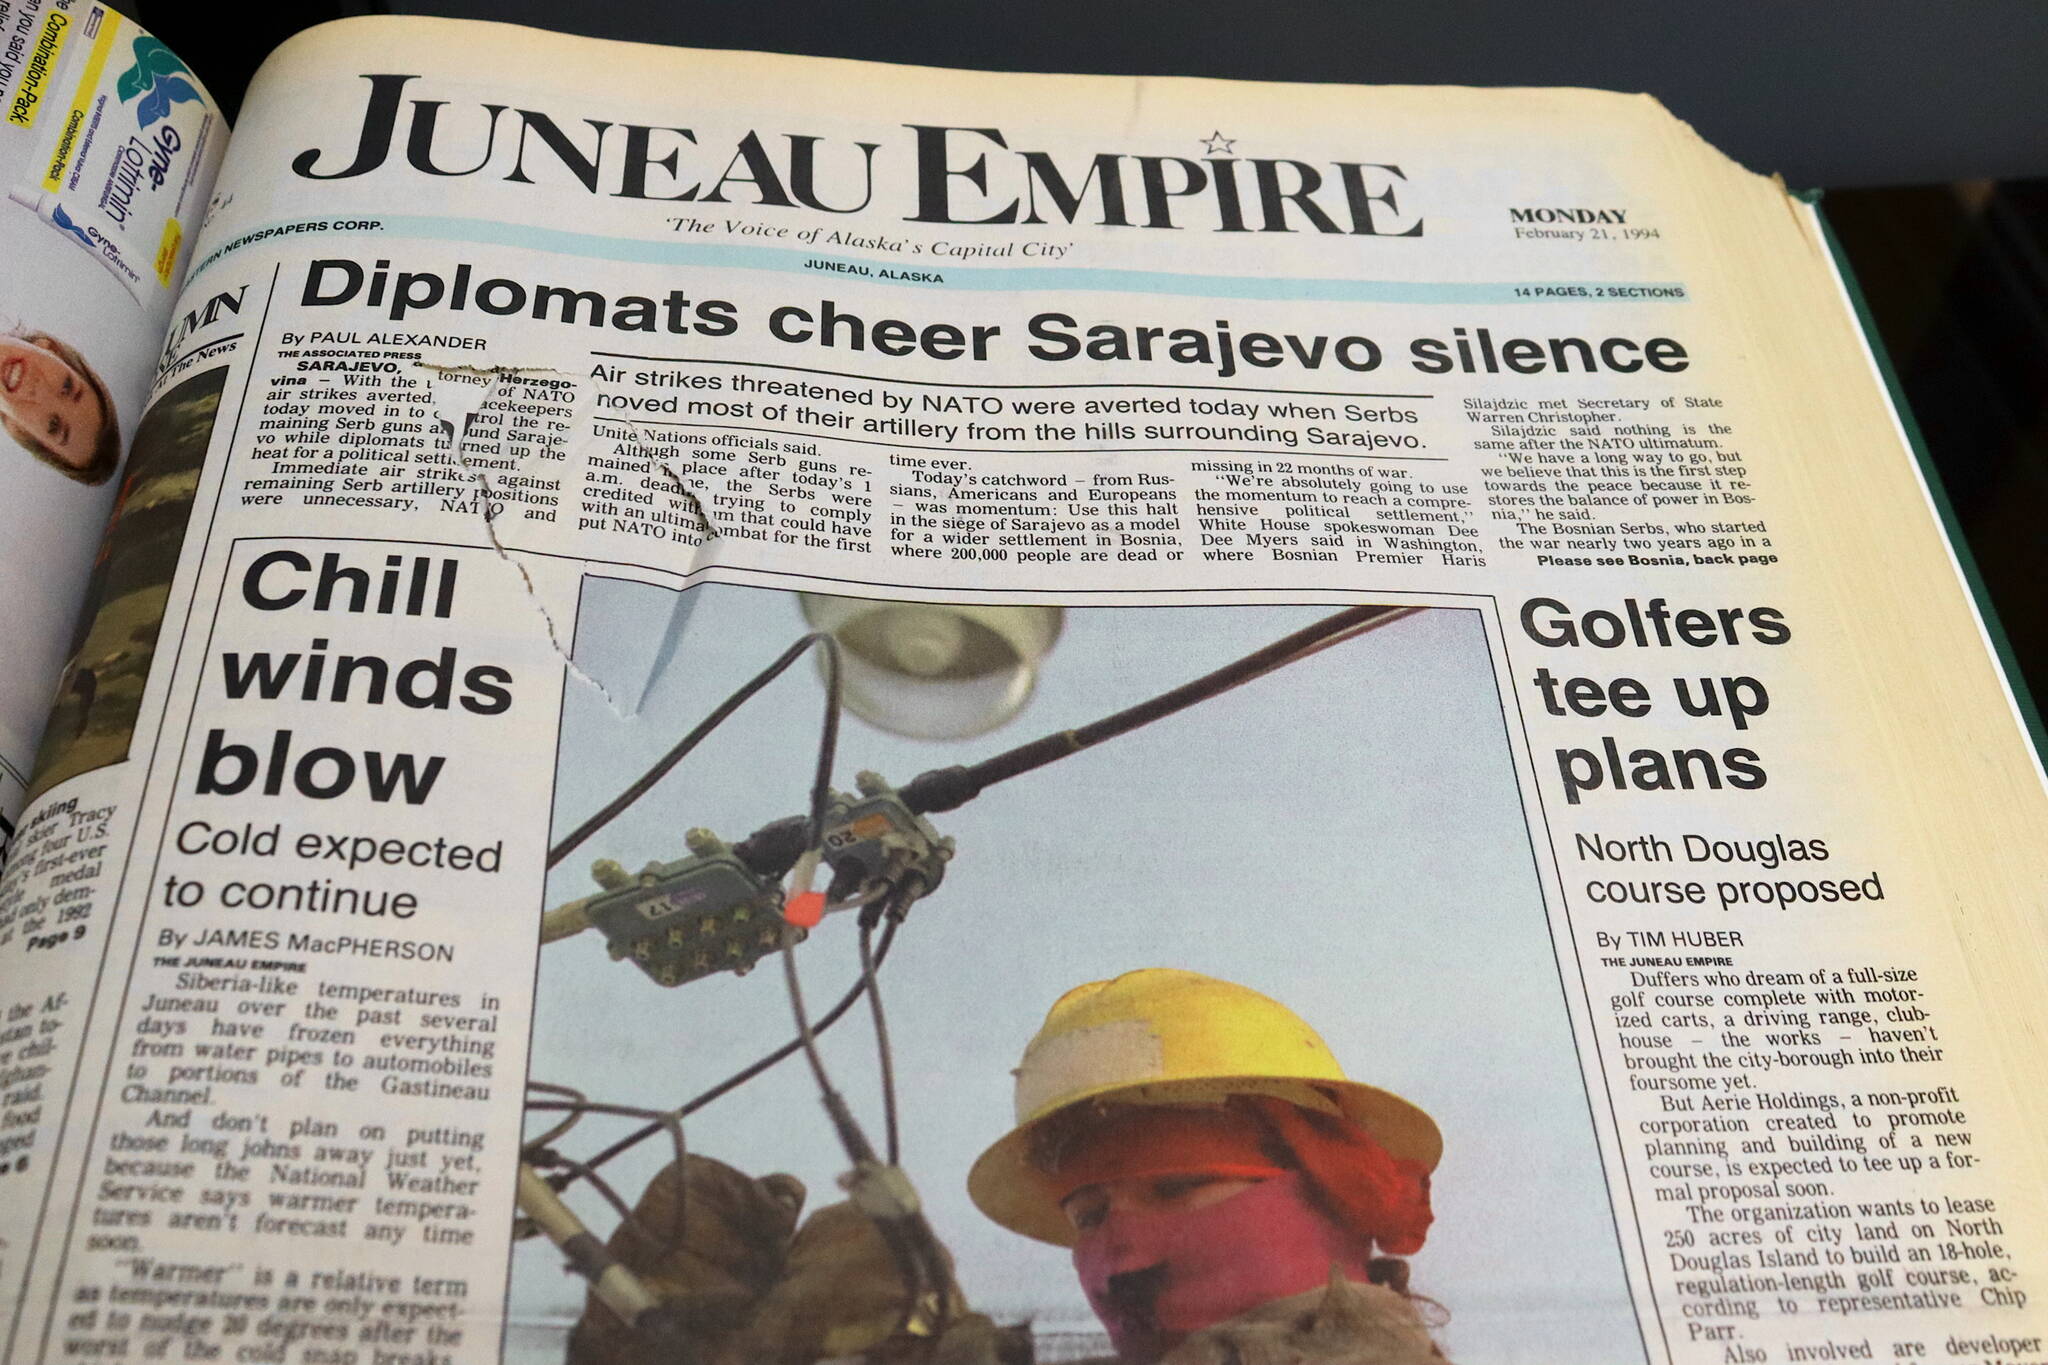 The front page of the Juneau Empire on Feb. 21, 1994. (Mark Sabbatini / Juneau Empire)